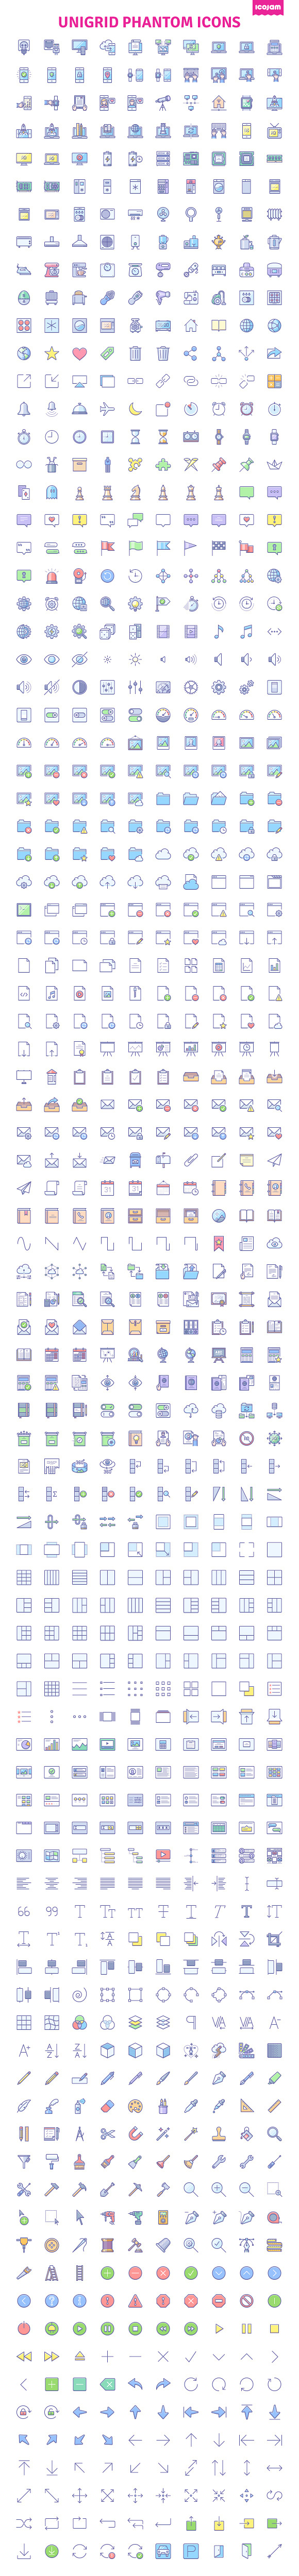 3000 Unigrid Phantom icons in Communication Icons - product preview 3